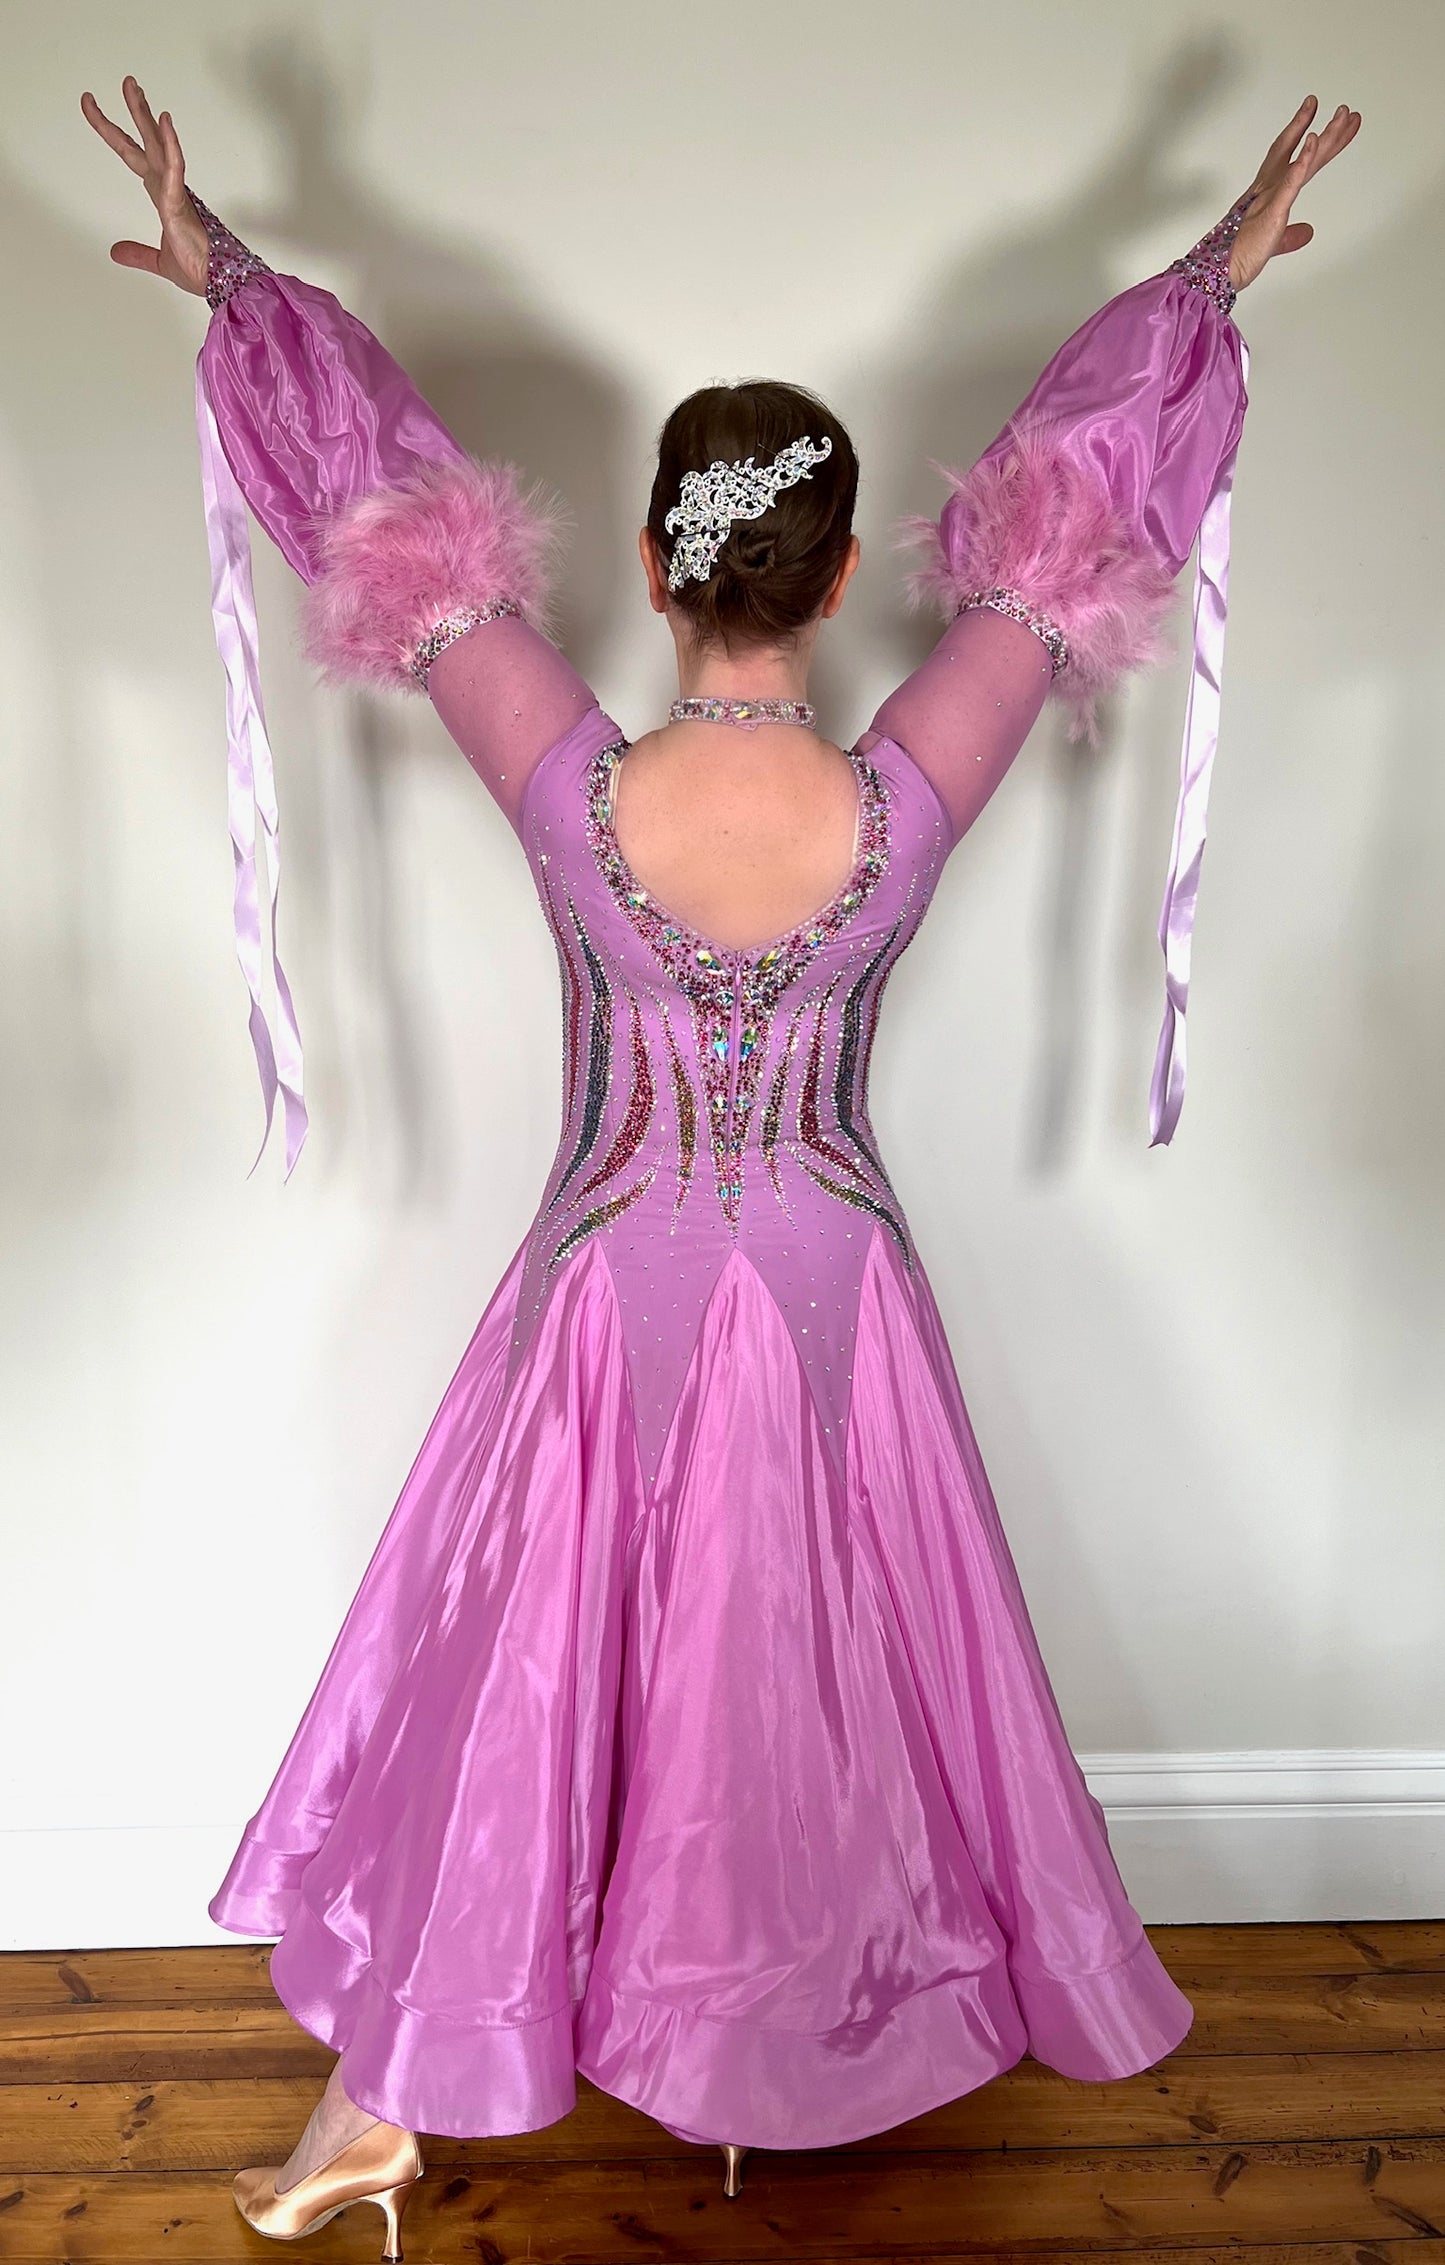 320 Beautiful Competition Ballroom Dance Dress. Beautiful stoning with detachable puff cuffs with ribbons & feathers. High back to wear own bra if required.